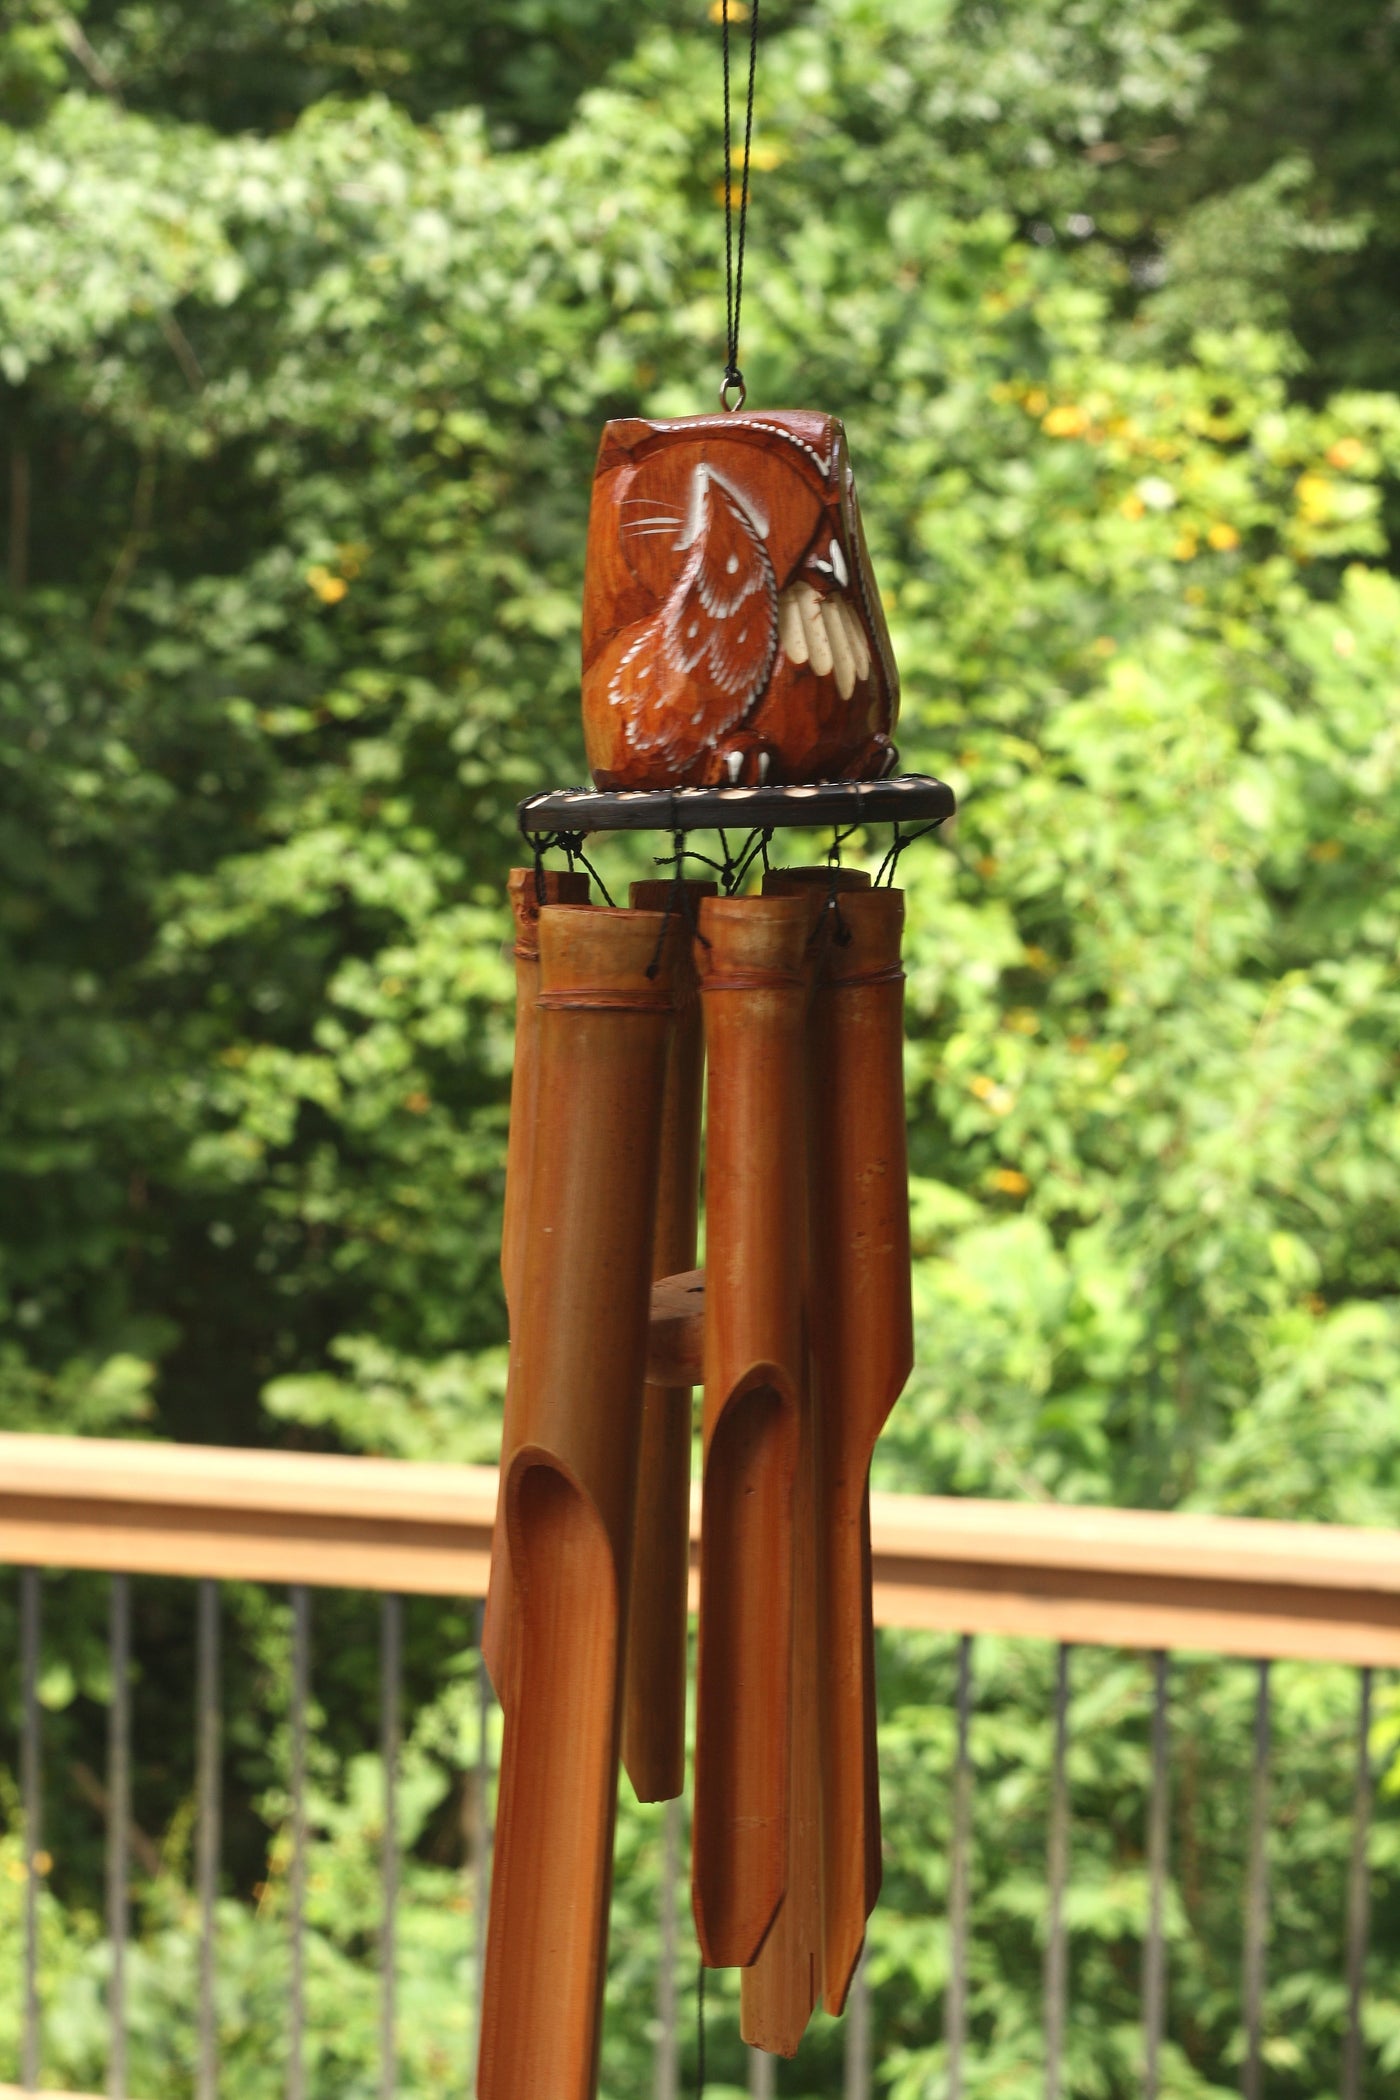 Handmade Wooden See No Evil Owl Bamboo Wind Chime Wood Statue Figurine Hoot Sculpture Art Rustic Patio Garden Outdoor Decor Handcrafted Decoration